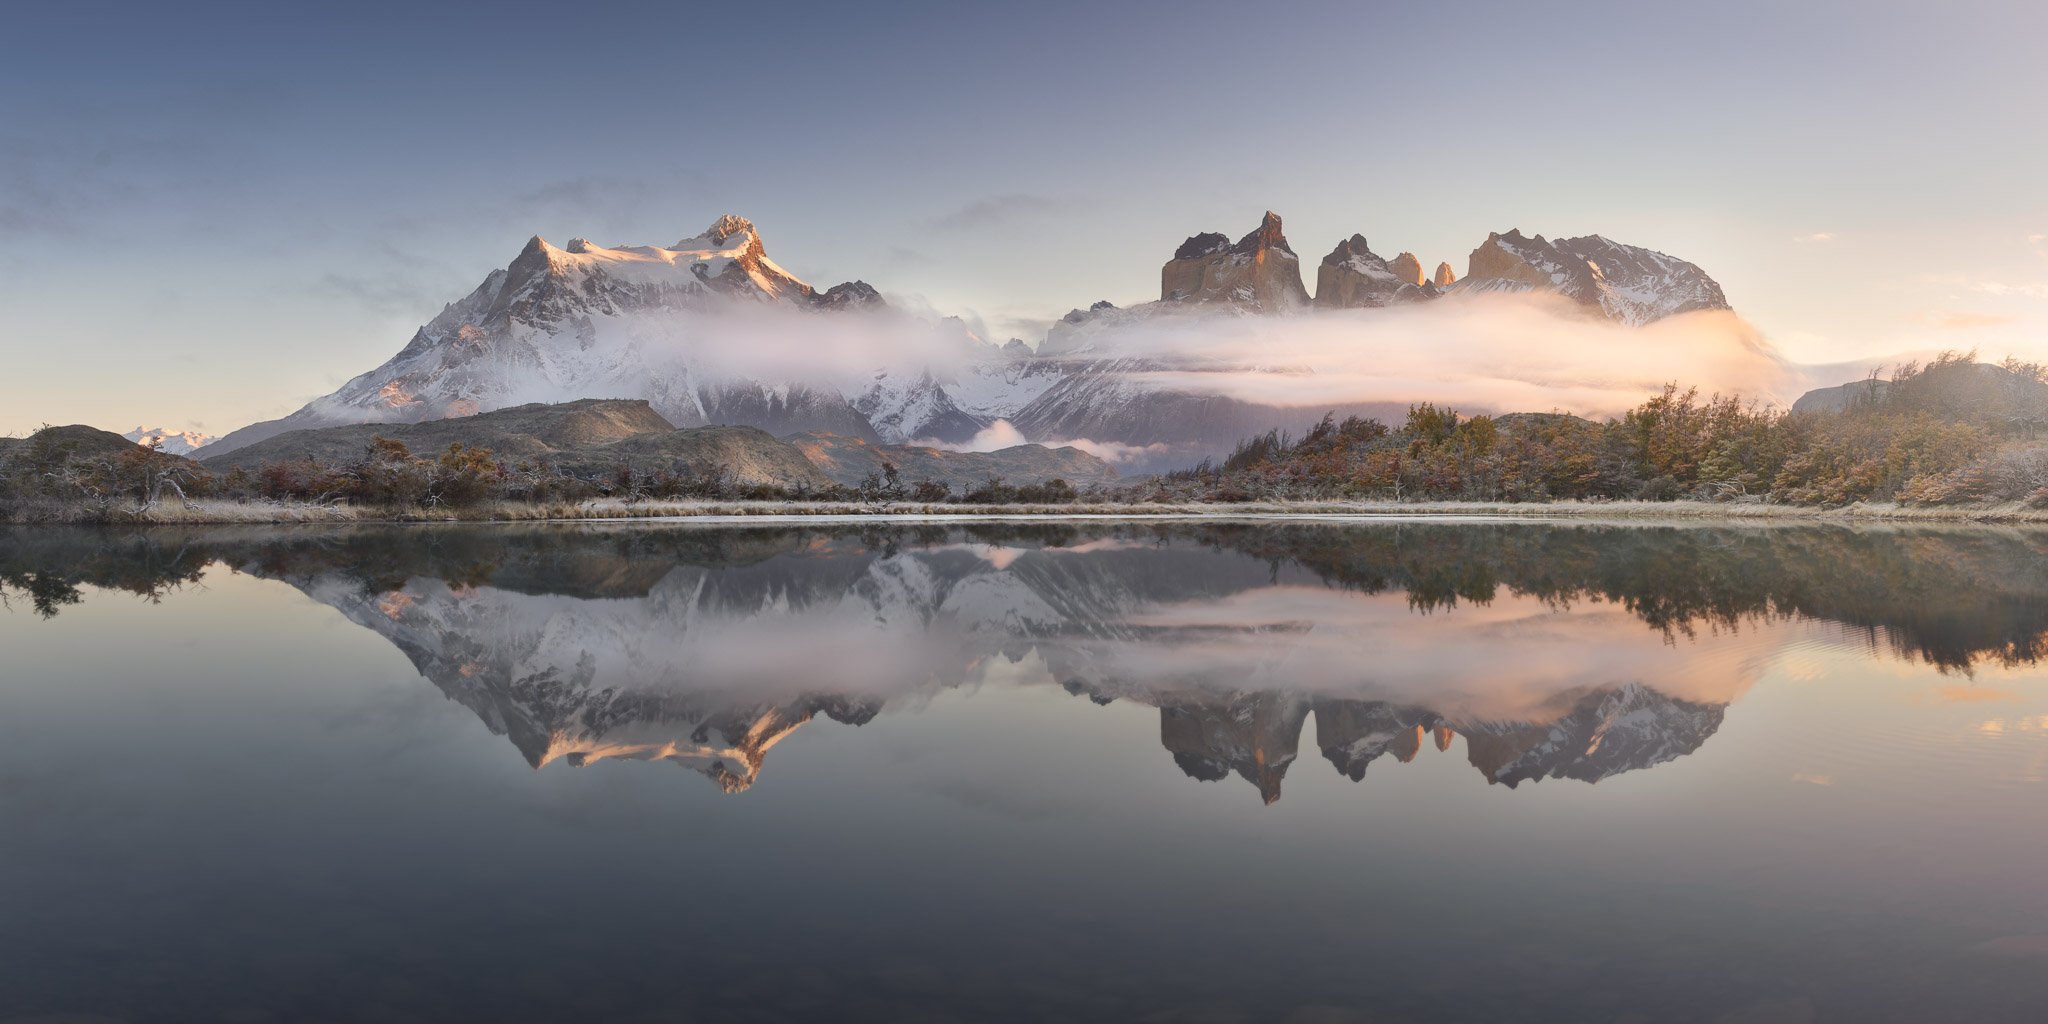 america, andes, beautiful, blue, chile, clouds, cuernos, del, frost, glacier, hiking, hill, ice, lake, landmark, landscape, light, mirror, morning, mountain, national, nature, outdoor, paine, pano, panorama, panoramic, park, patagonia, peak, pehoe, range,, Andrey Omelyanchuk